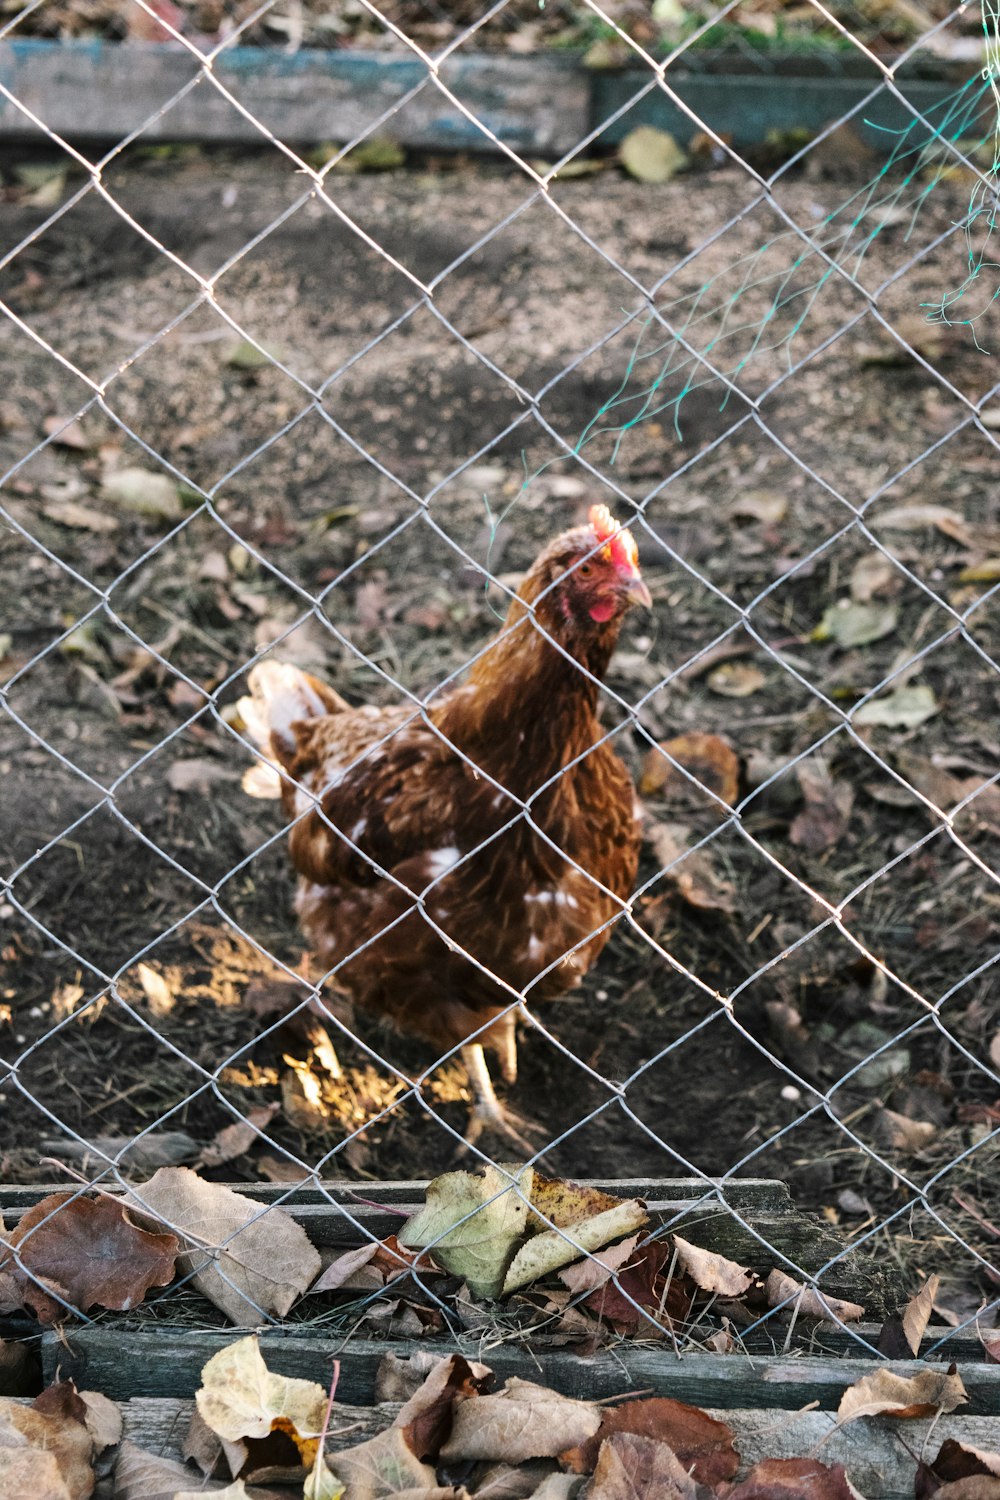 a chicken standing behind a chain link fence